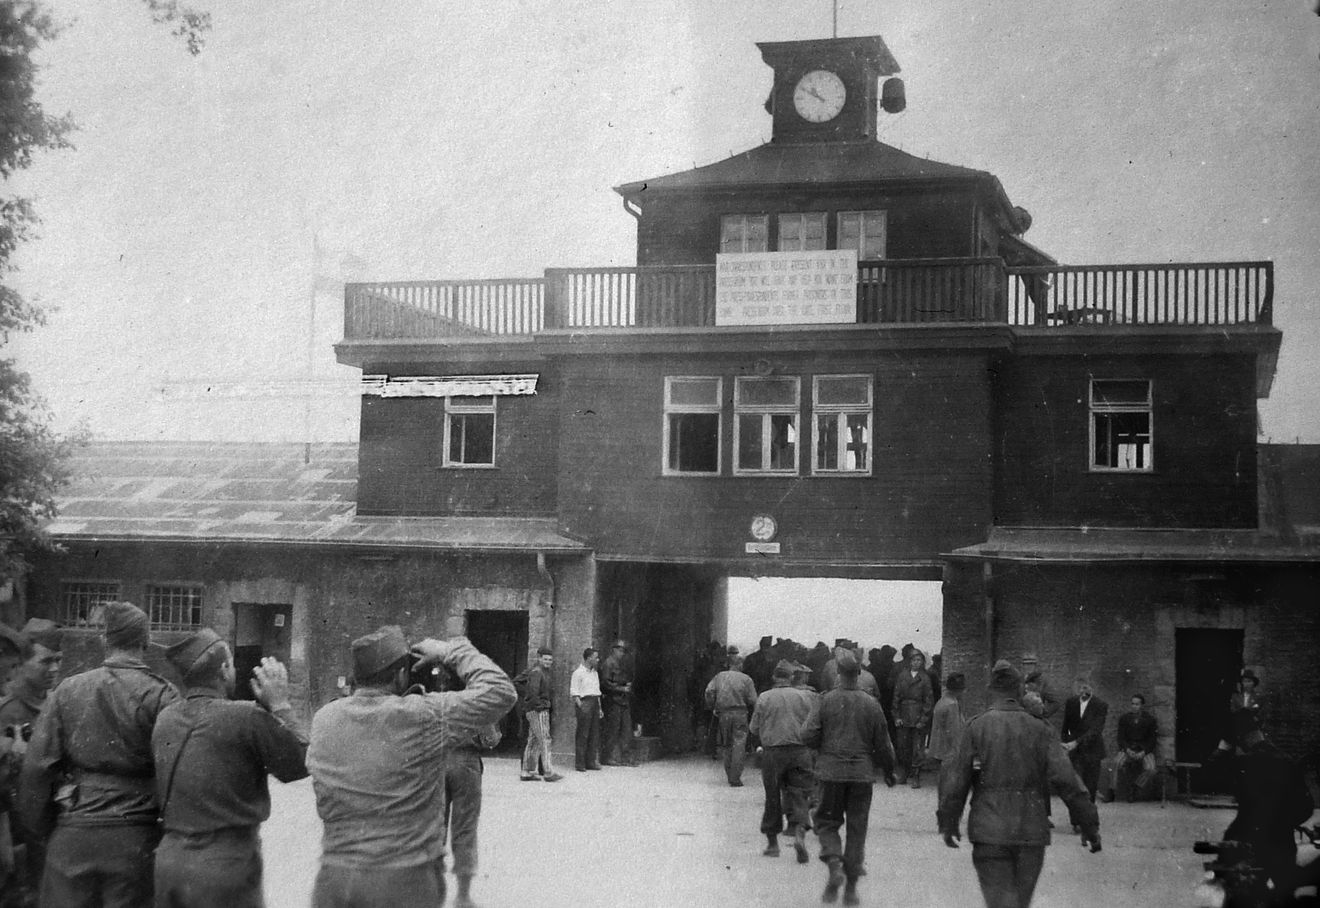 After the Allies began uncovering concentration camps, General Eisenhower directed that as many units as possible visit Buchenwald, outside of Weimar, to bear witness to Nazi atrocities. My father and other officers visited the camp in late May or early June of 1945. Here the visitors are snapping photos of Buchenwald’s main gate.